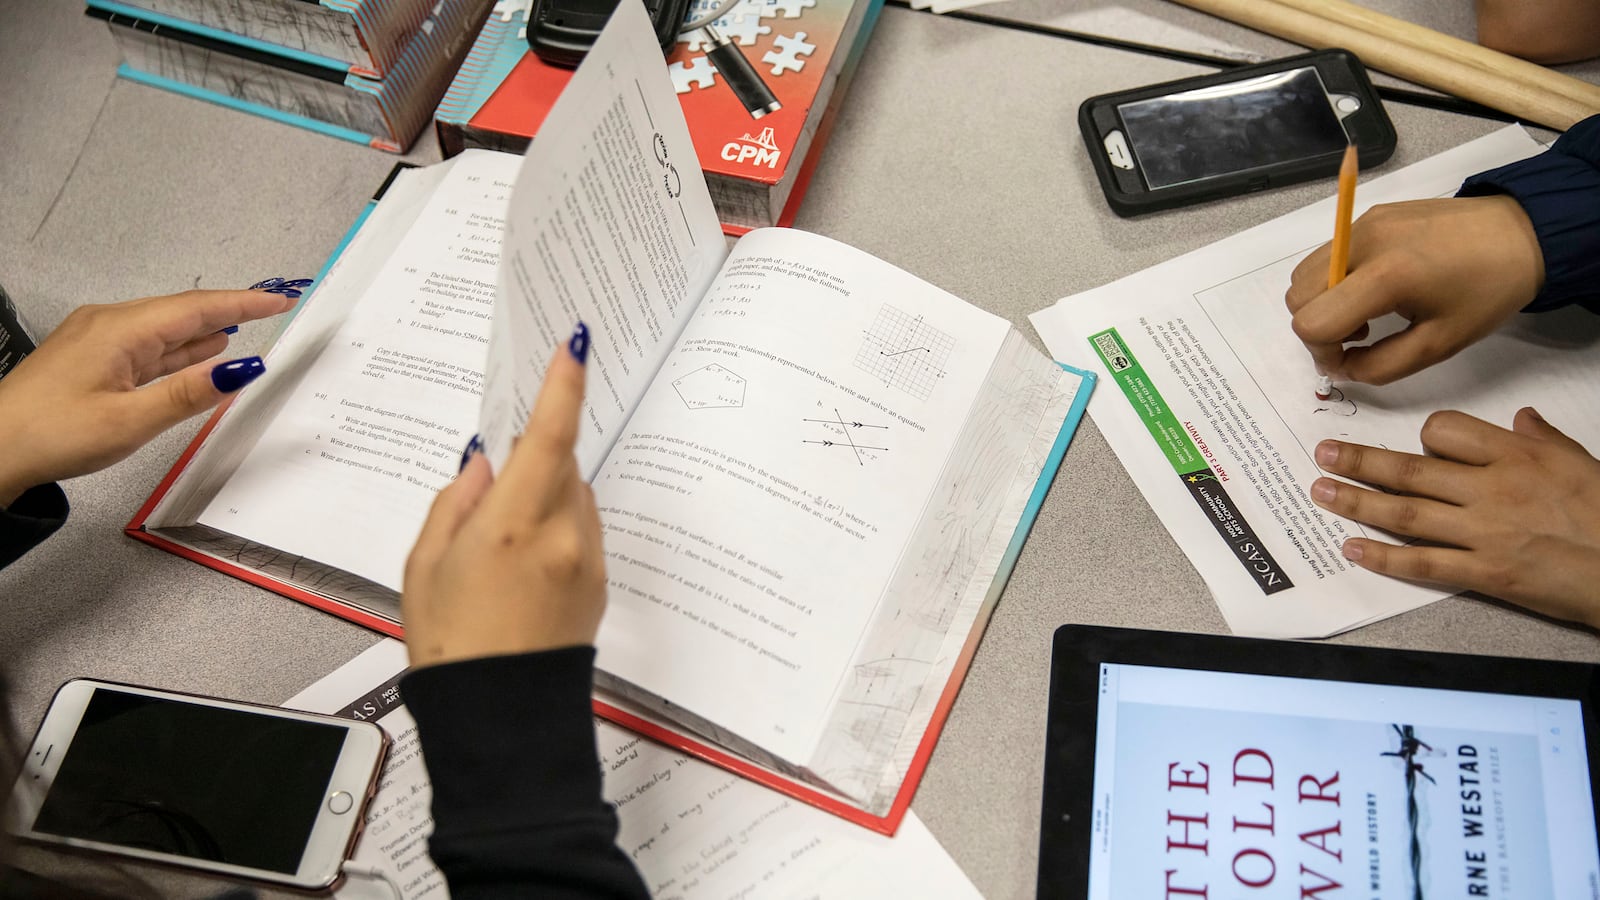 Noel Community Arts School students work through assigned classwork during a study period at the Denver school in May 2019.